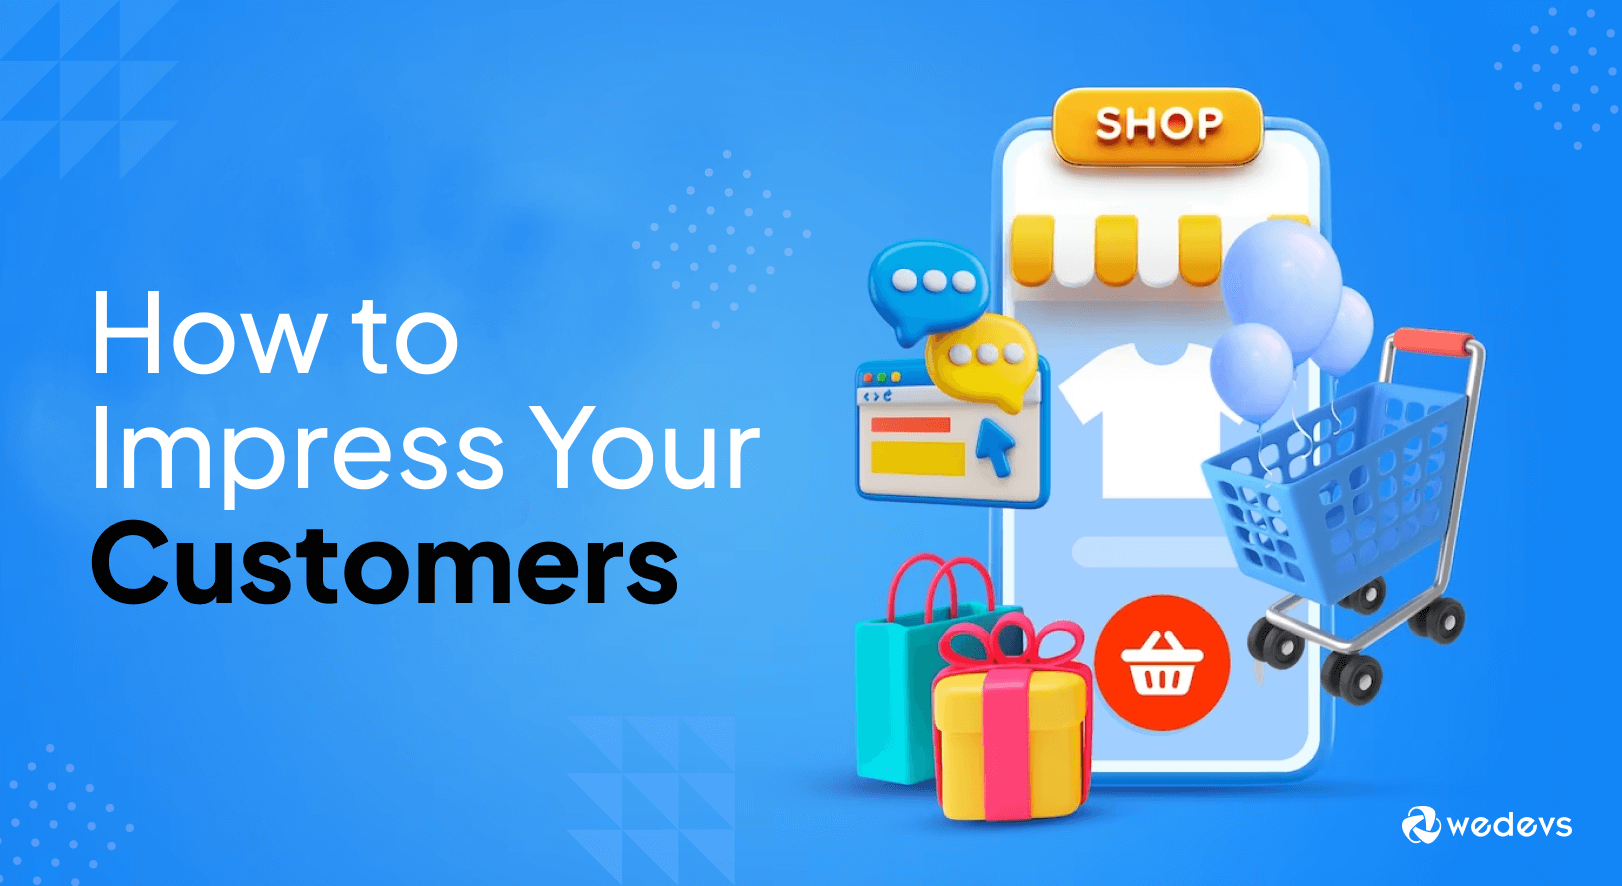 10 Ways to Impress Your Customers &#8211; A Guide for Business Owners